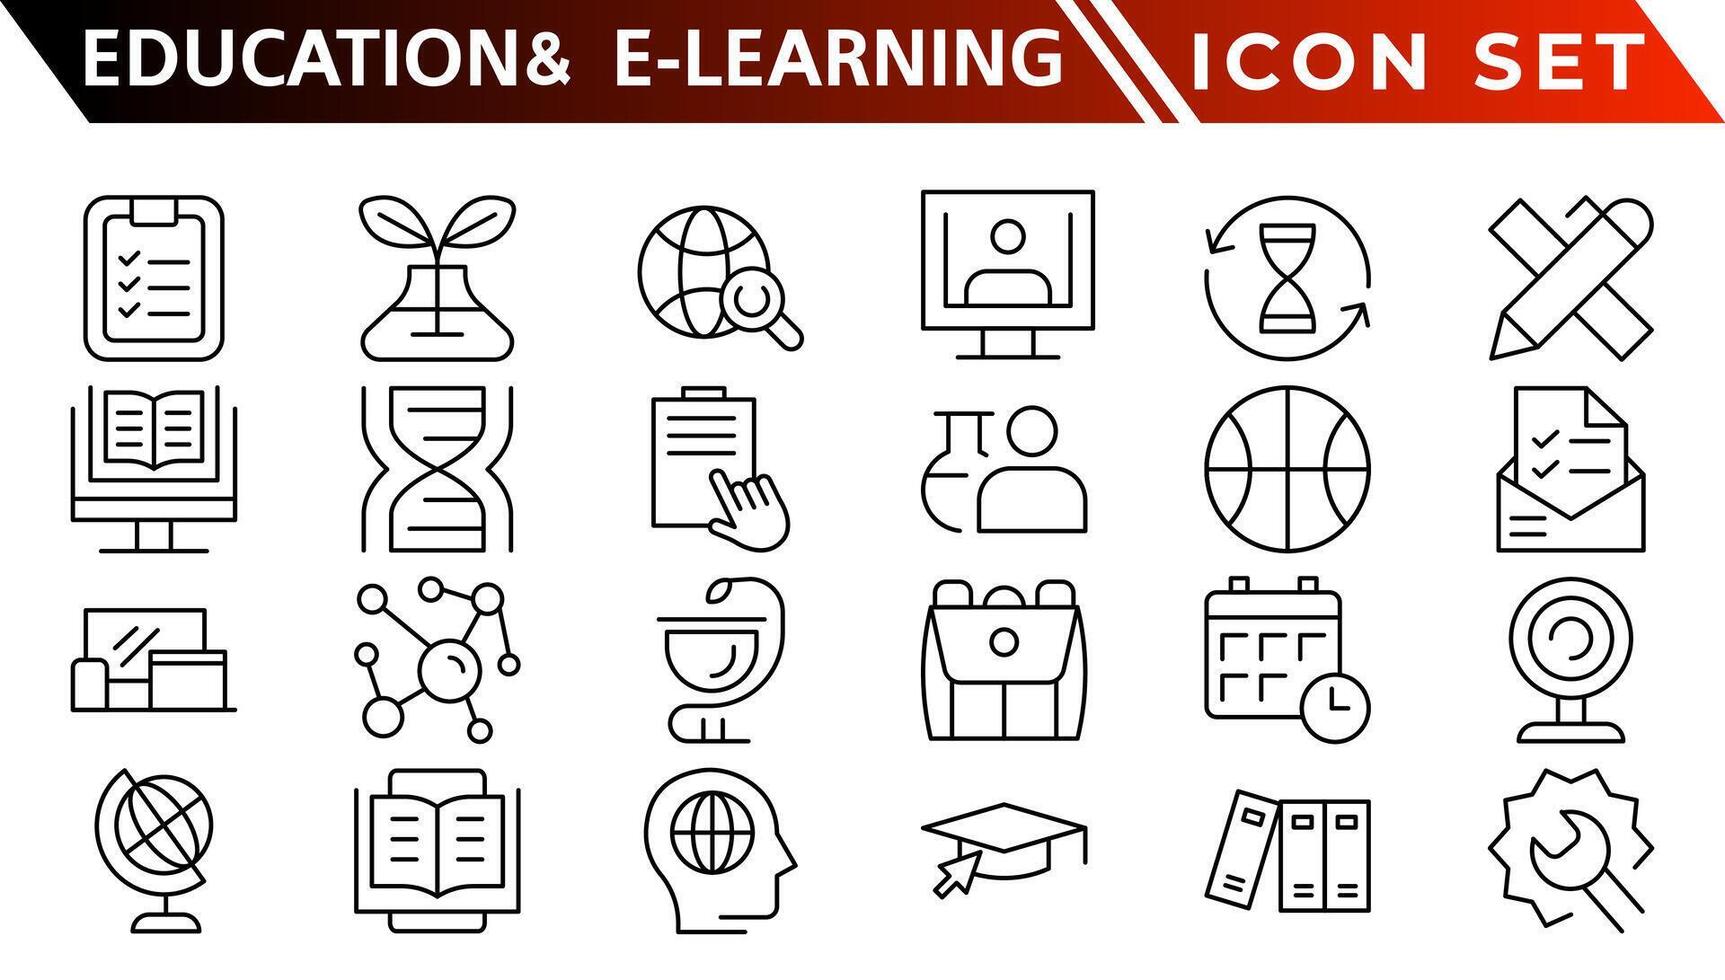 Education and E-Learning web icons in line style. School, university, textbook, learning. Vector illustration